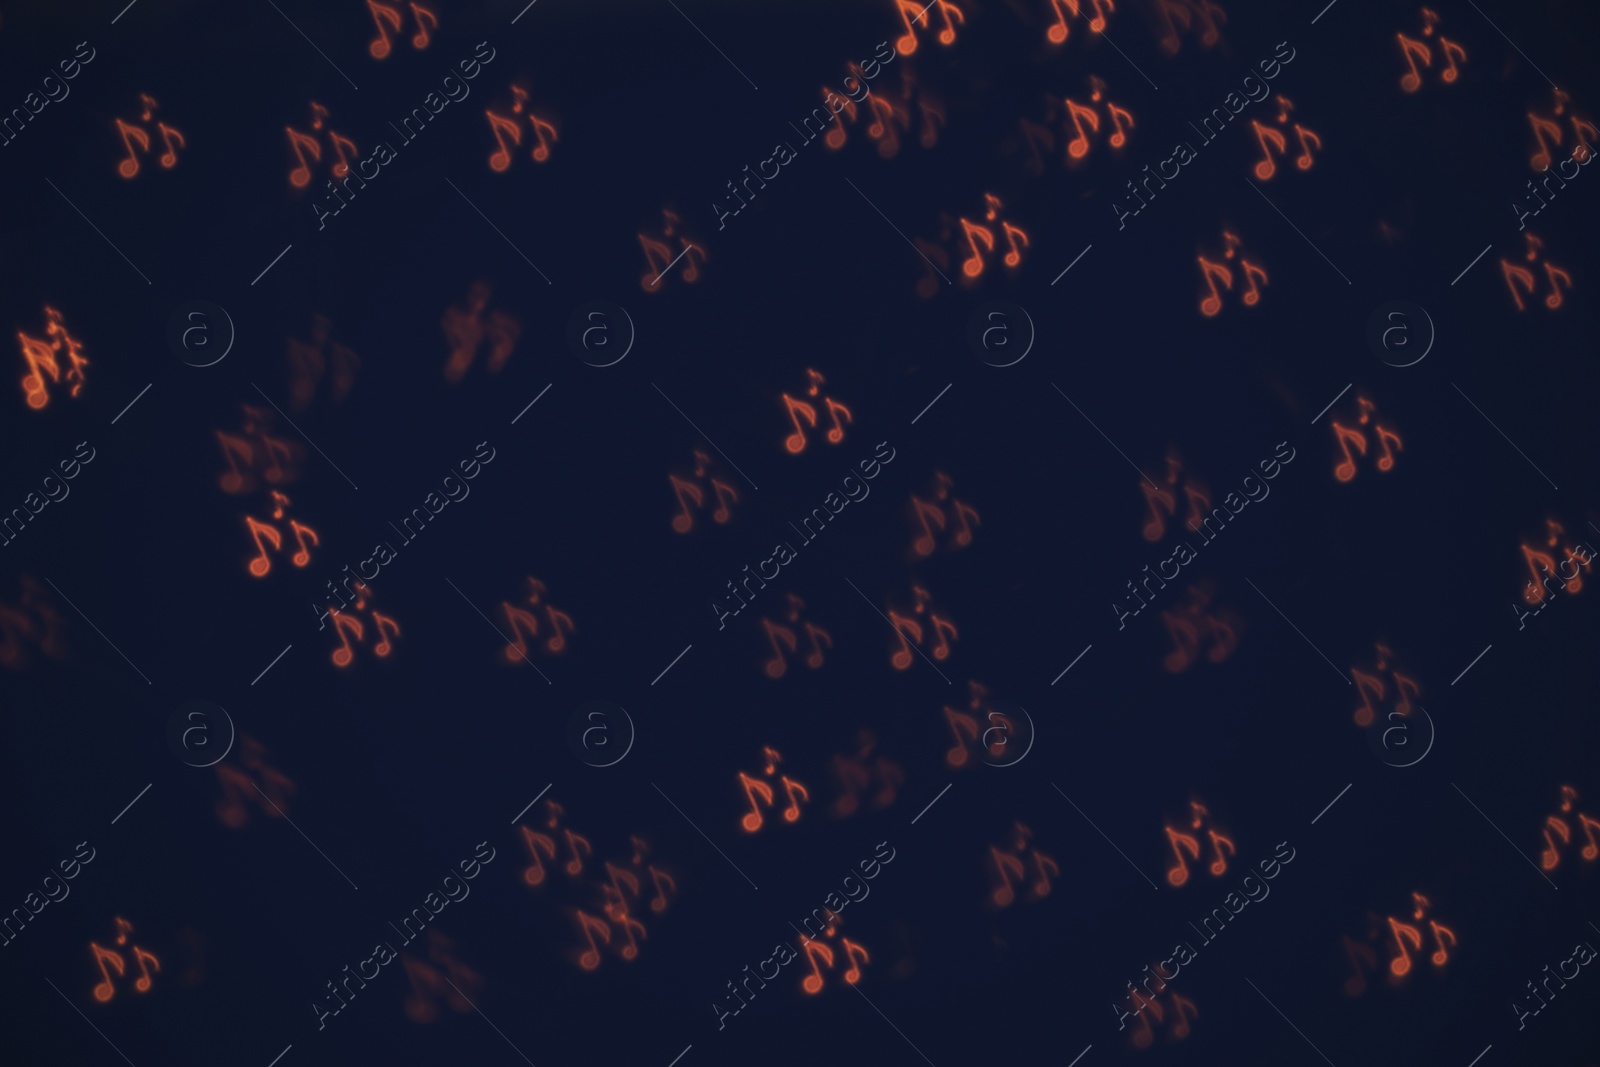 Photo of Blurred view of note shaped lights on dark background. Bokeh effect